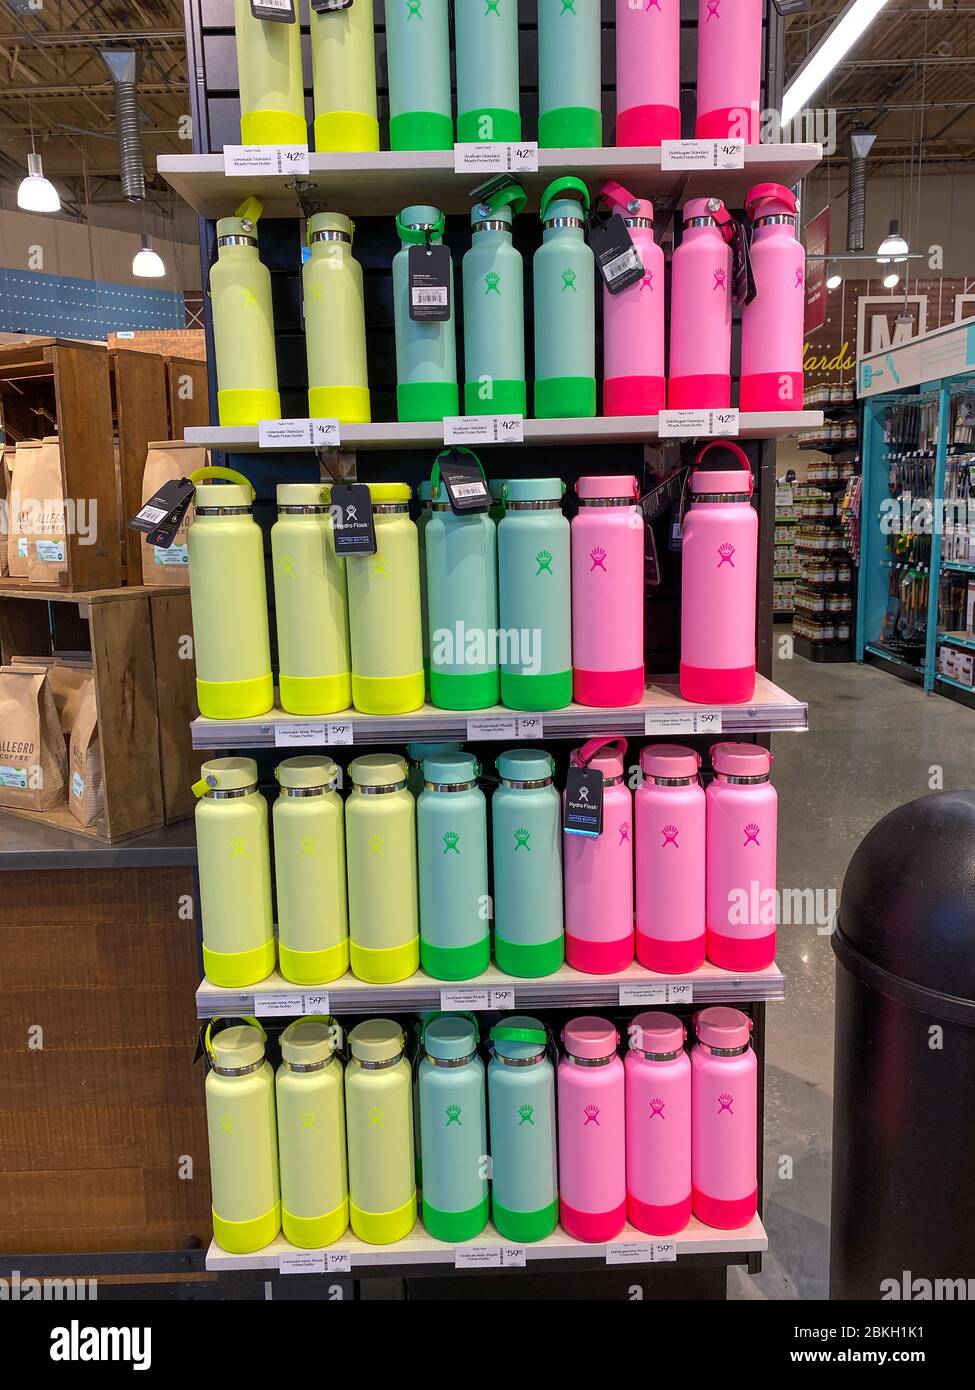 https://c8.alamy.com/comp/2BKH1K1/orlandoflusa-5320-a-display-of-bags-of-hydroflask-reusable-water-bottles-at-a-whole-foods-grocery-store-2BKH1K1.jpg